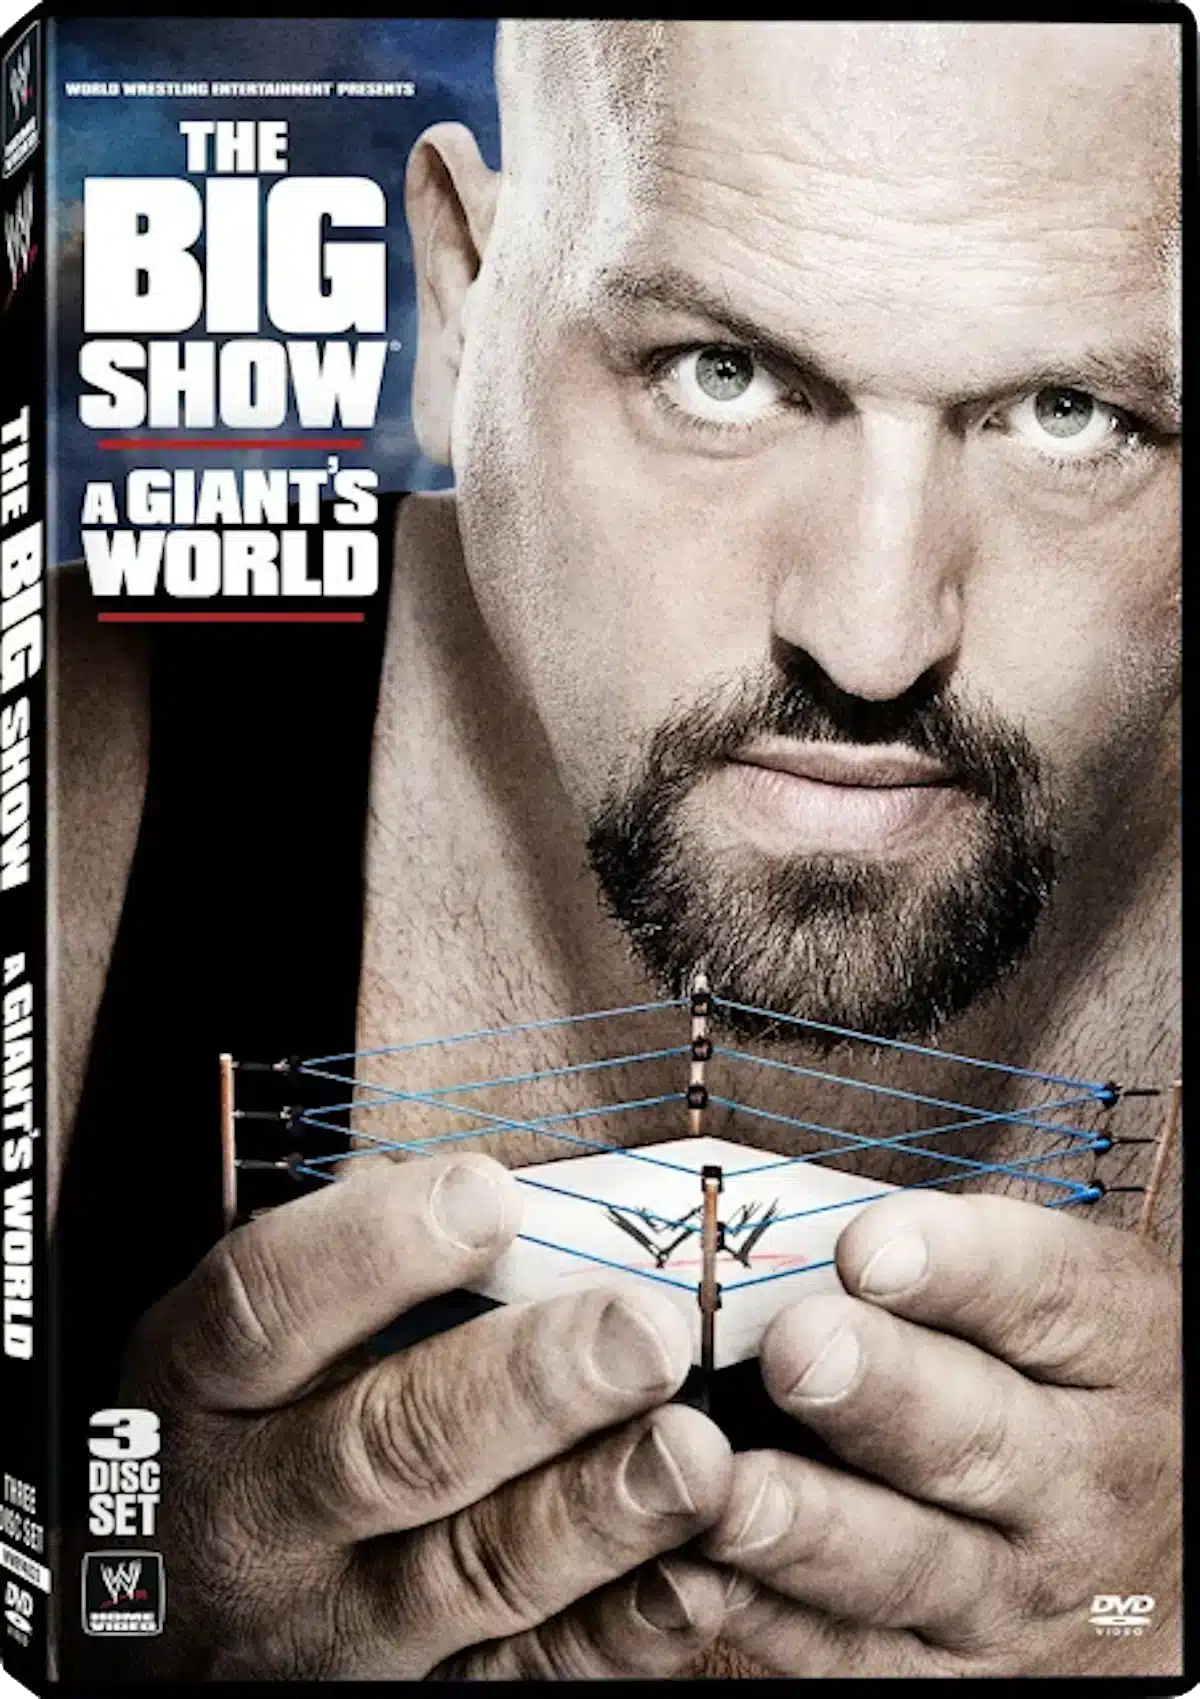 The Big Show: A Giant's World DVD